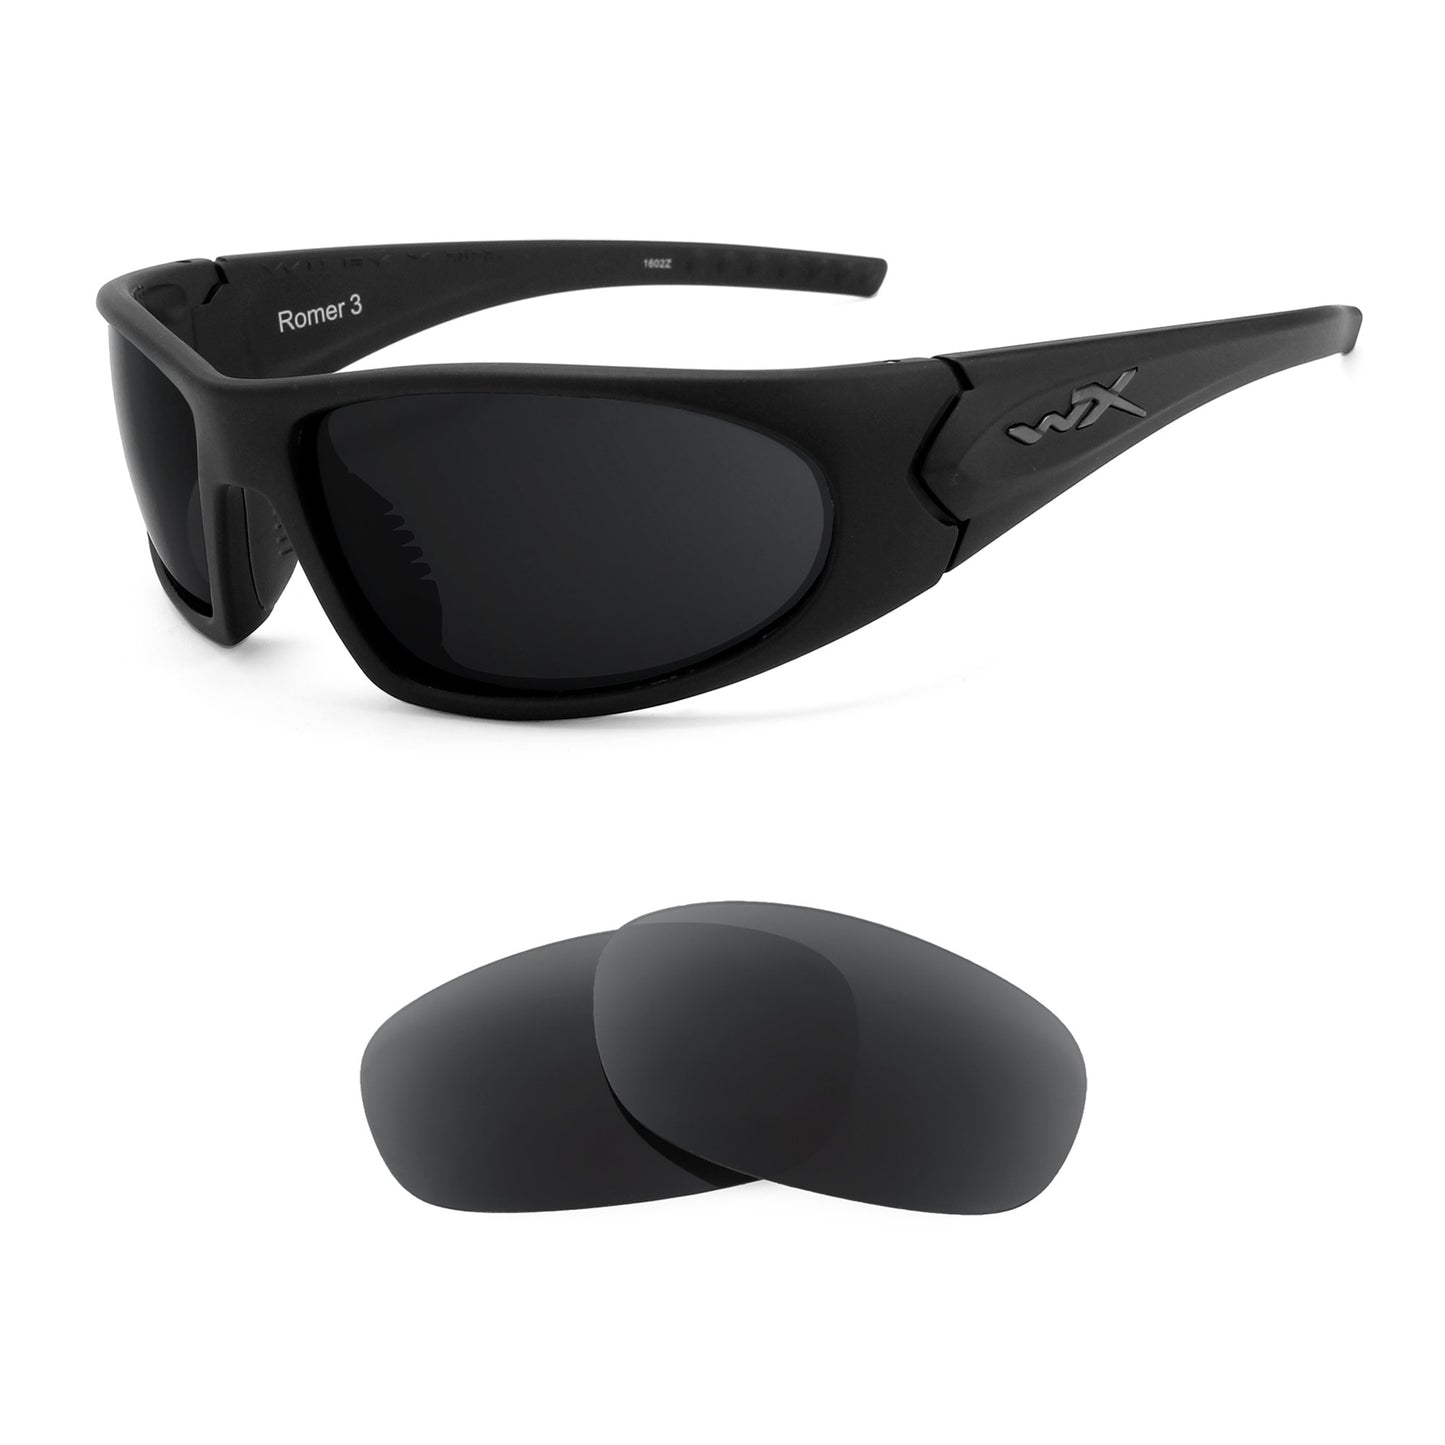 Wiley X Romer 3 sunglasses with replacement lenses